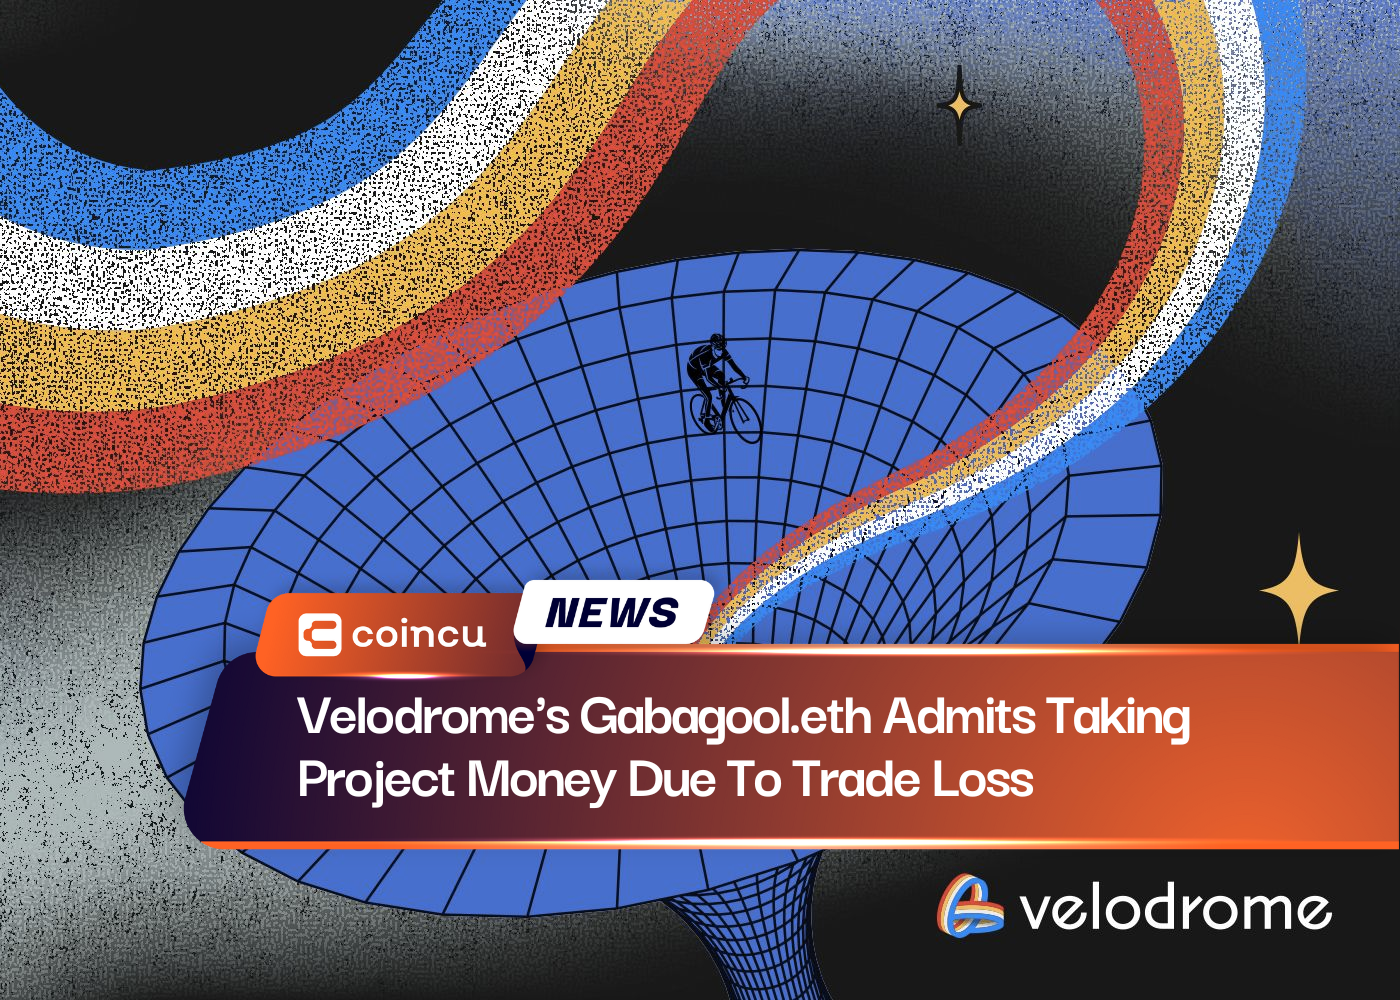 Velodrome's Gabagool.eth Admits Taking Project Money Due To Trade Loss